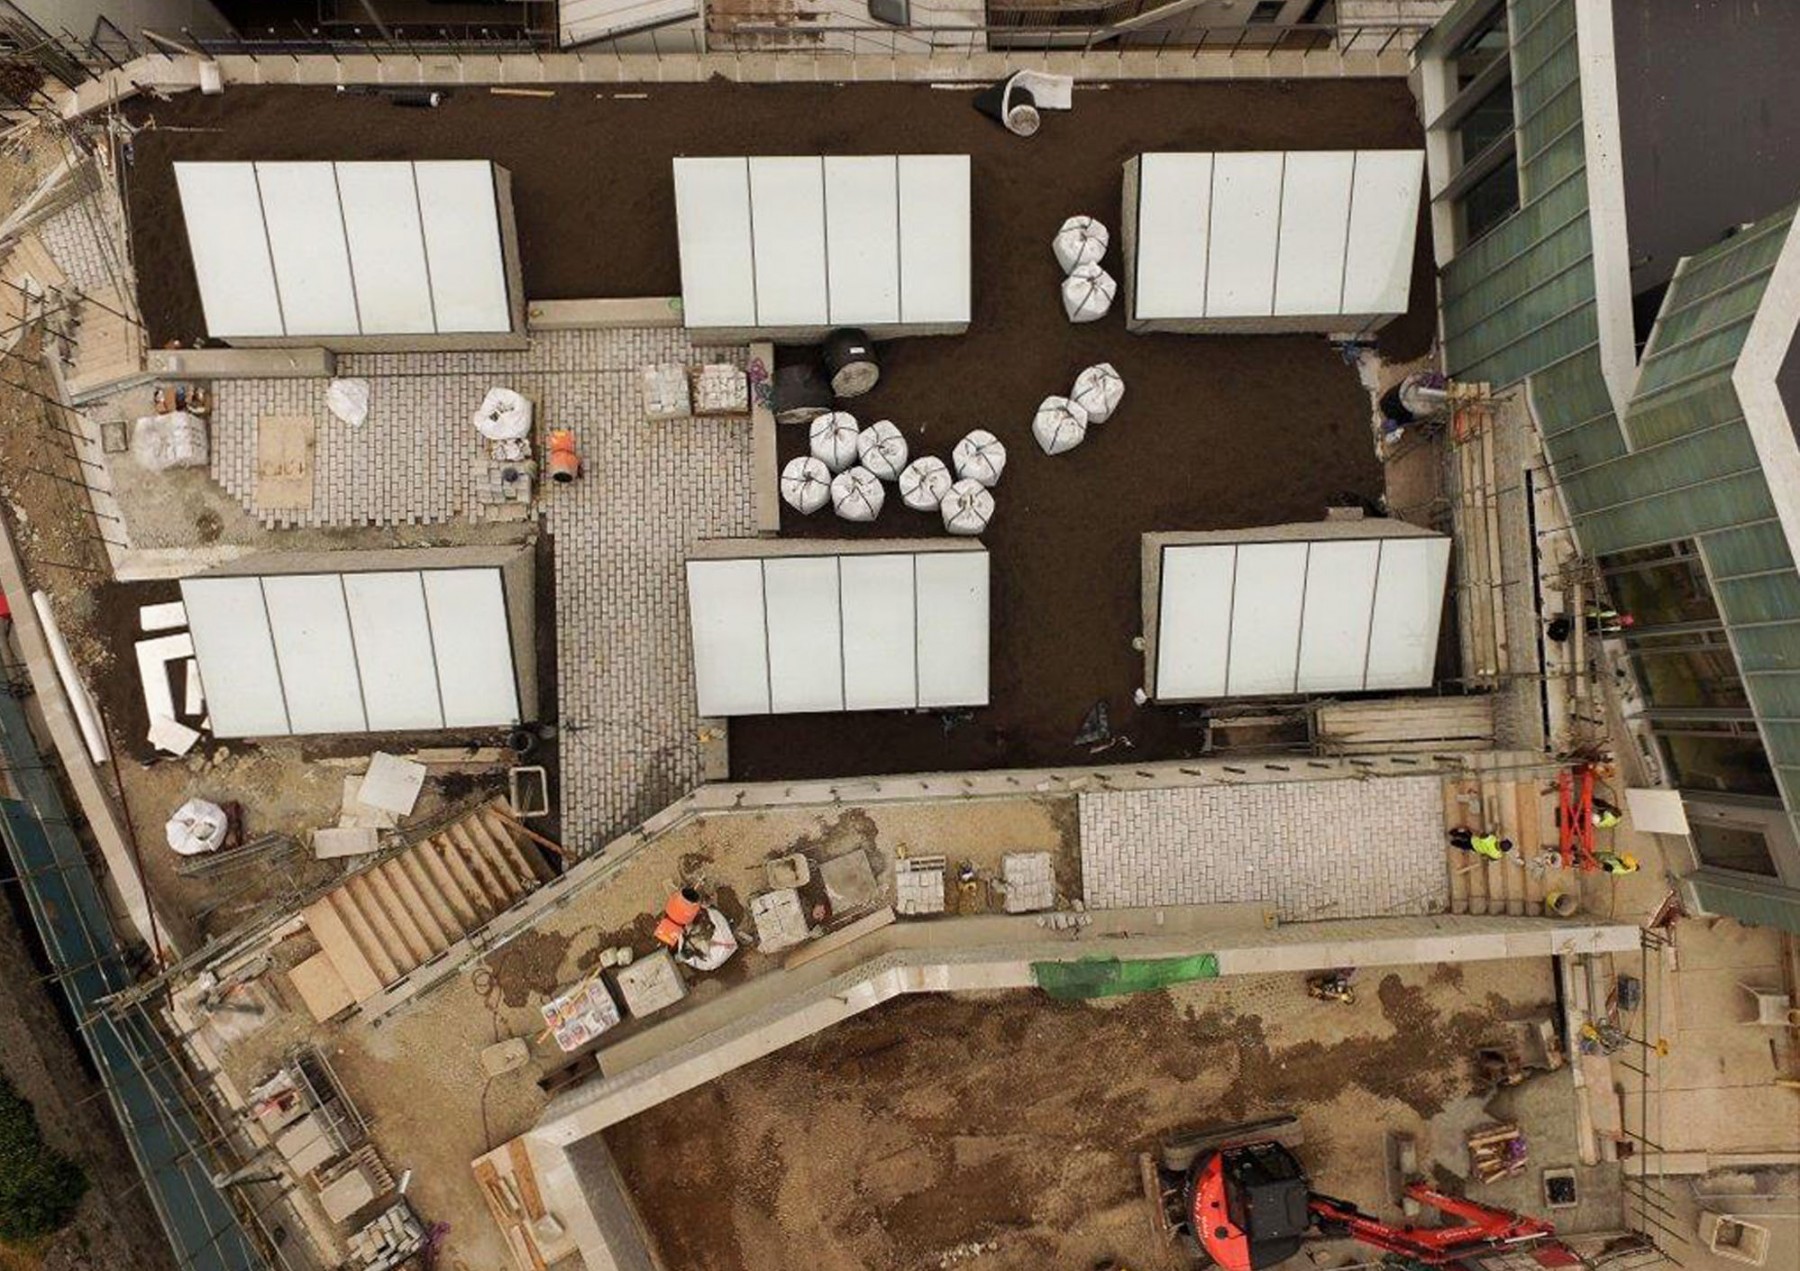 Tate-st-ive-cornwall-drone-construction-site-jamie-fobert-architects